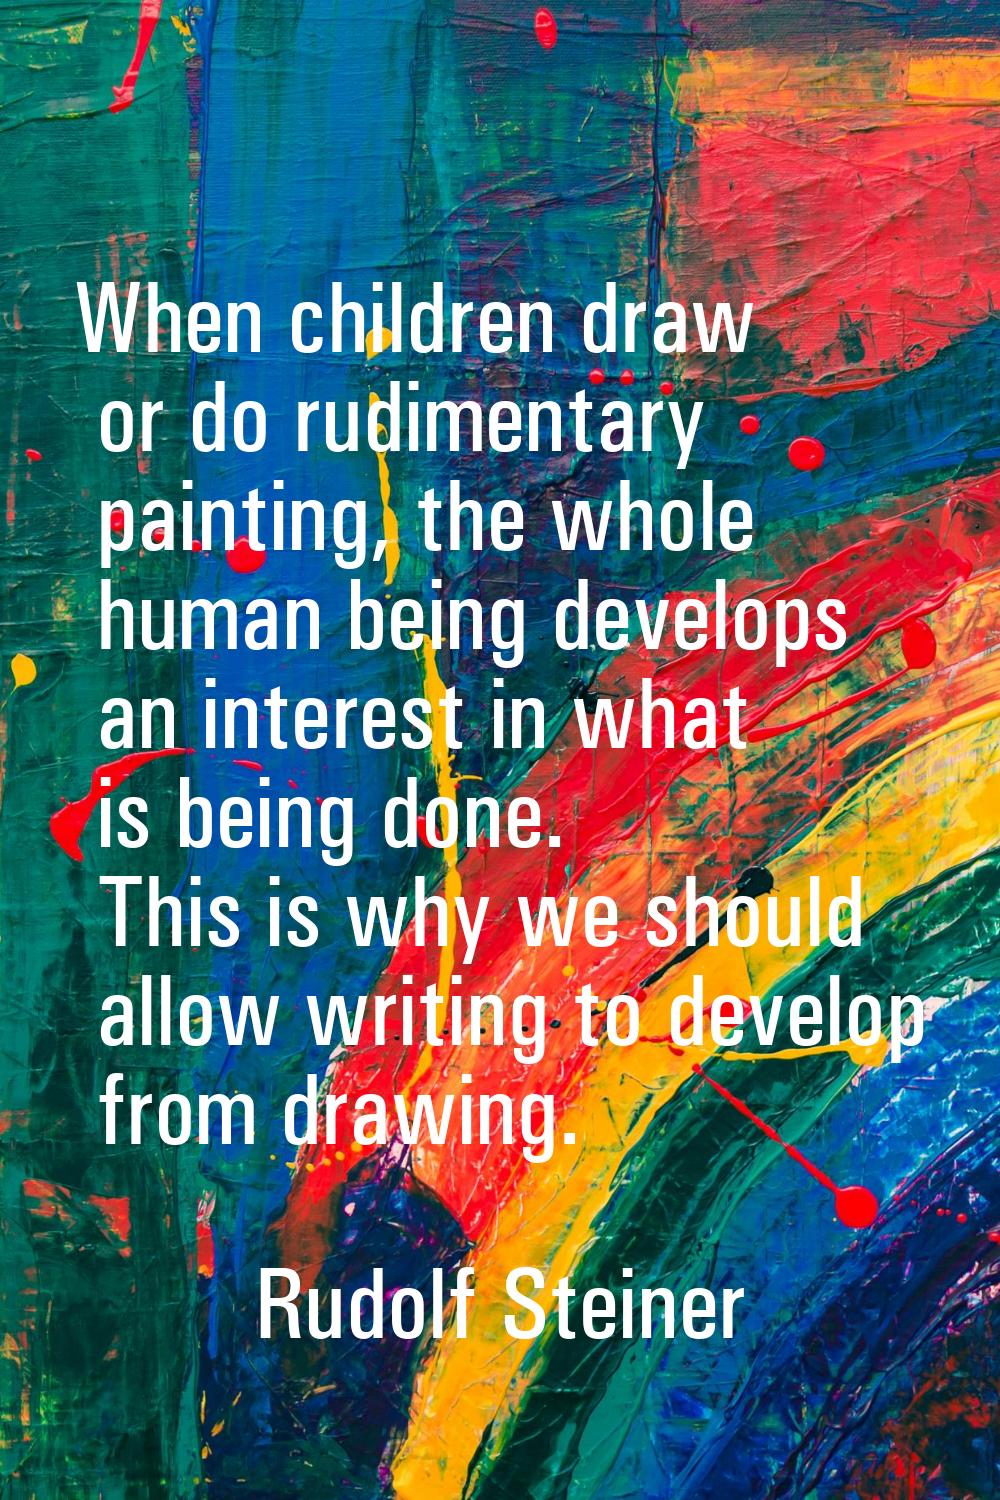 When children draw or do rudimentary painting, the whole human being develops an interest in what i